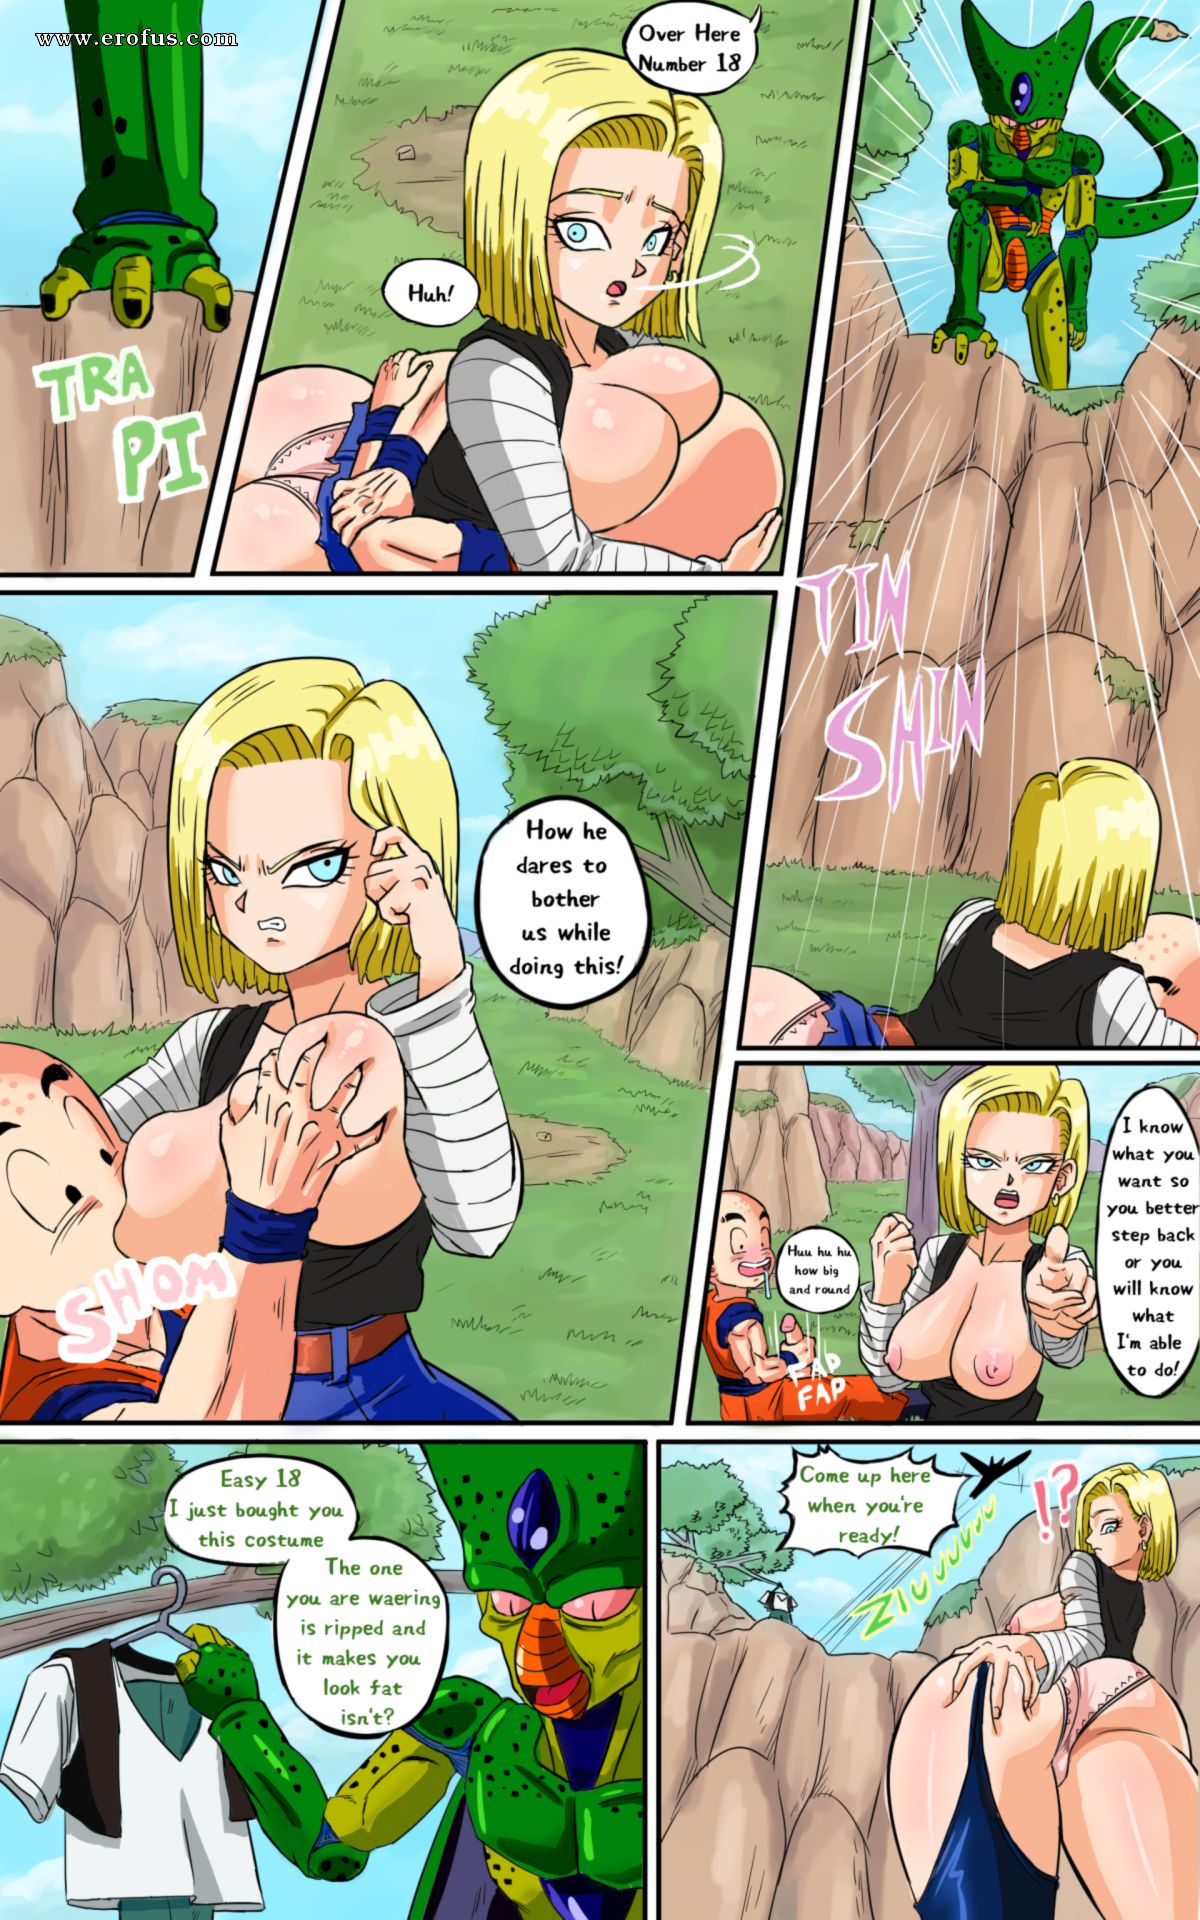 Android 18 nackt sex